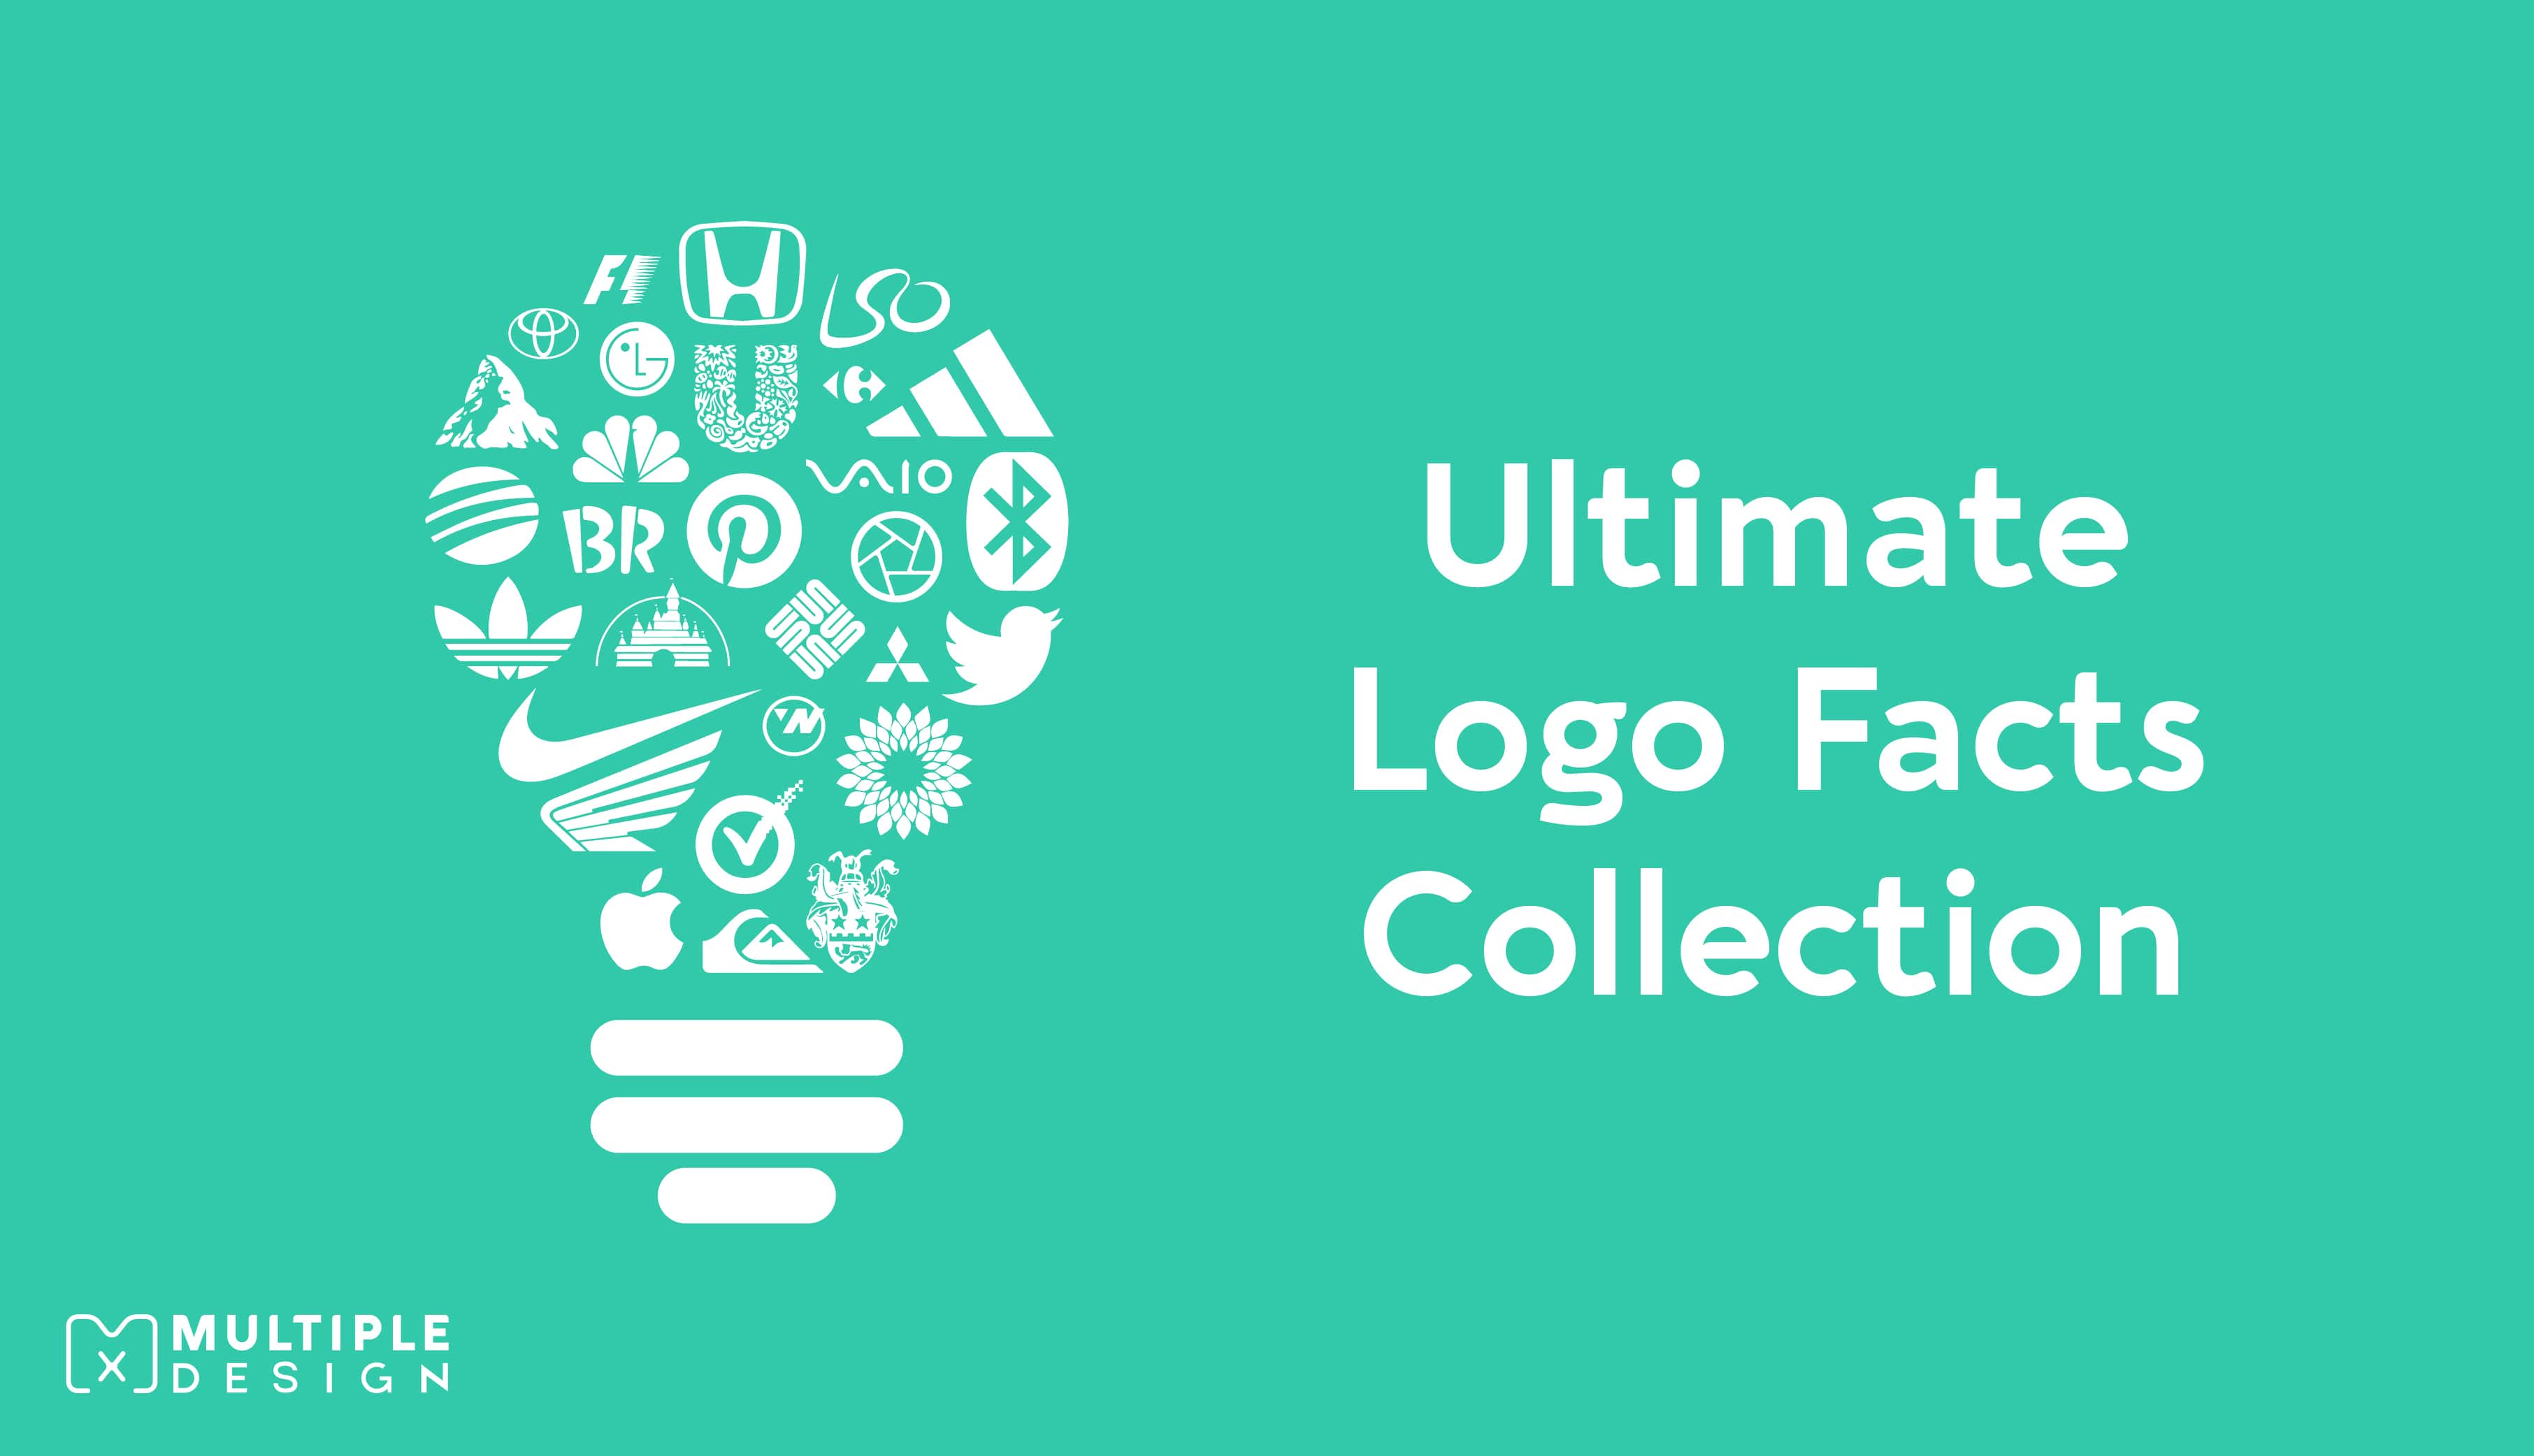 The Ultimate Logo Facts Collection: Updated Weekly